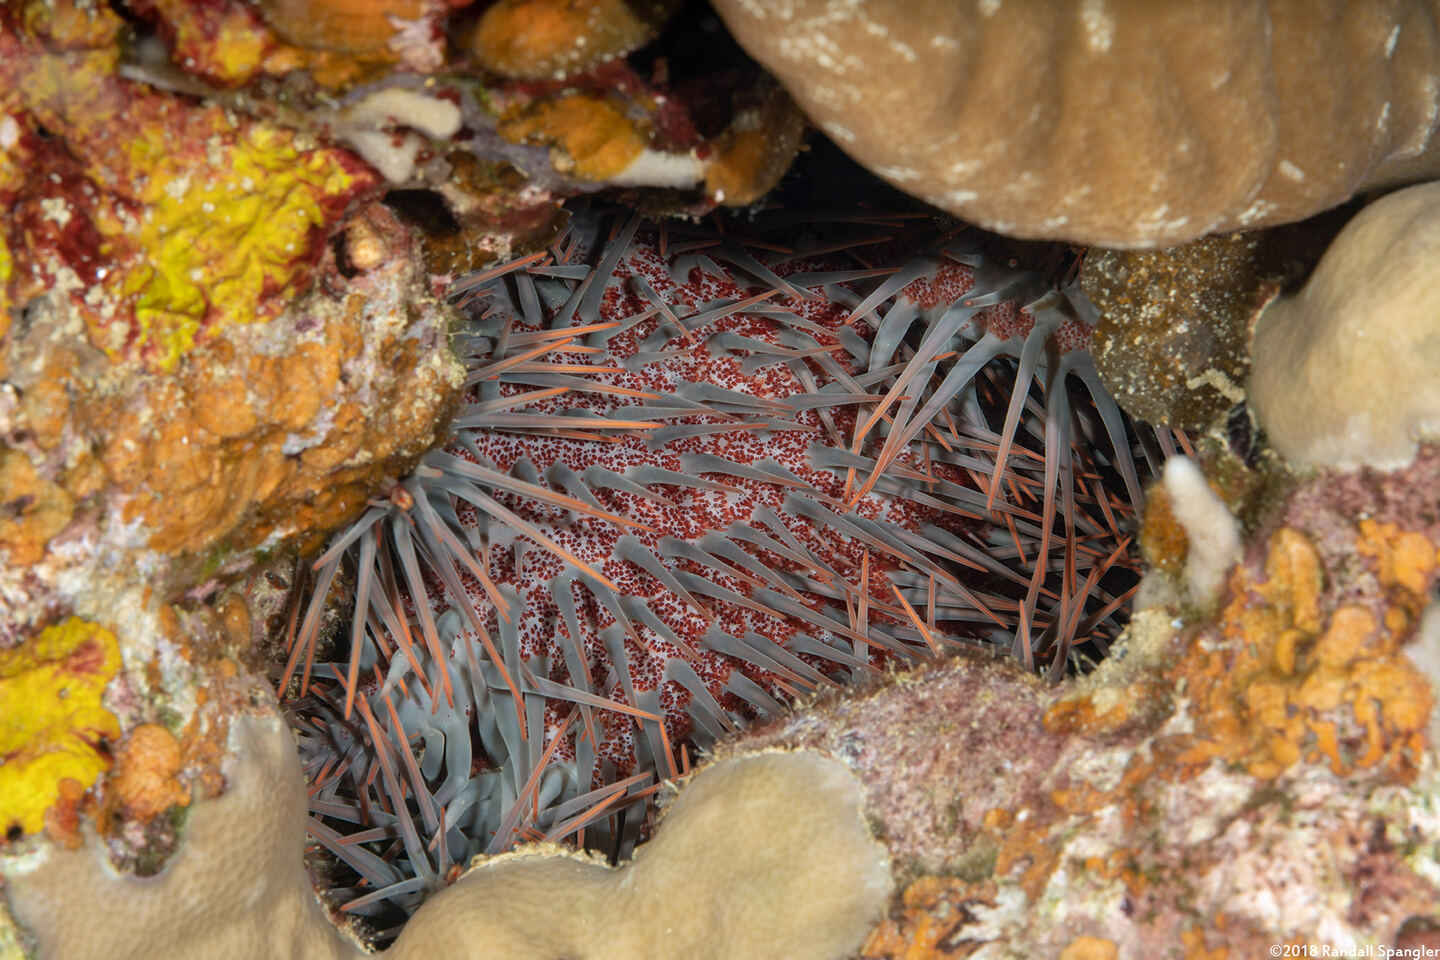 Acanthaster planci (Crown-of-Thorns Star); Hiding in a hole in the coral